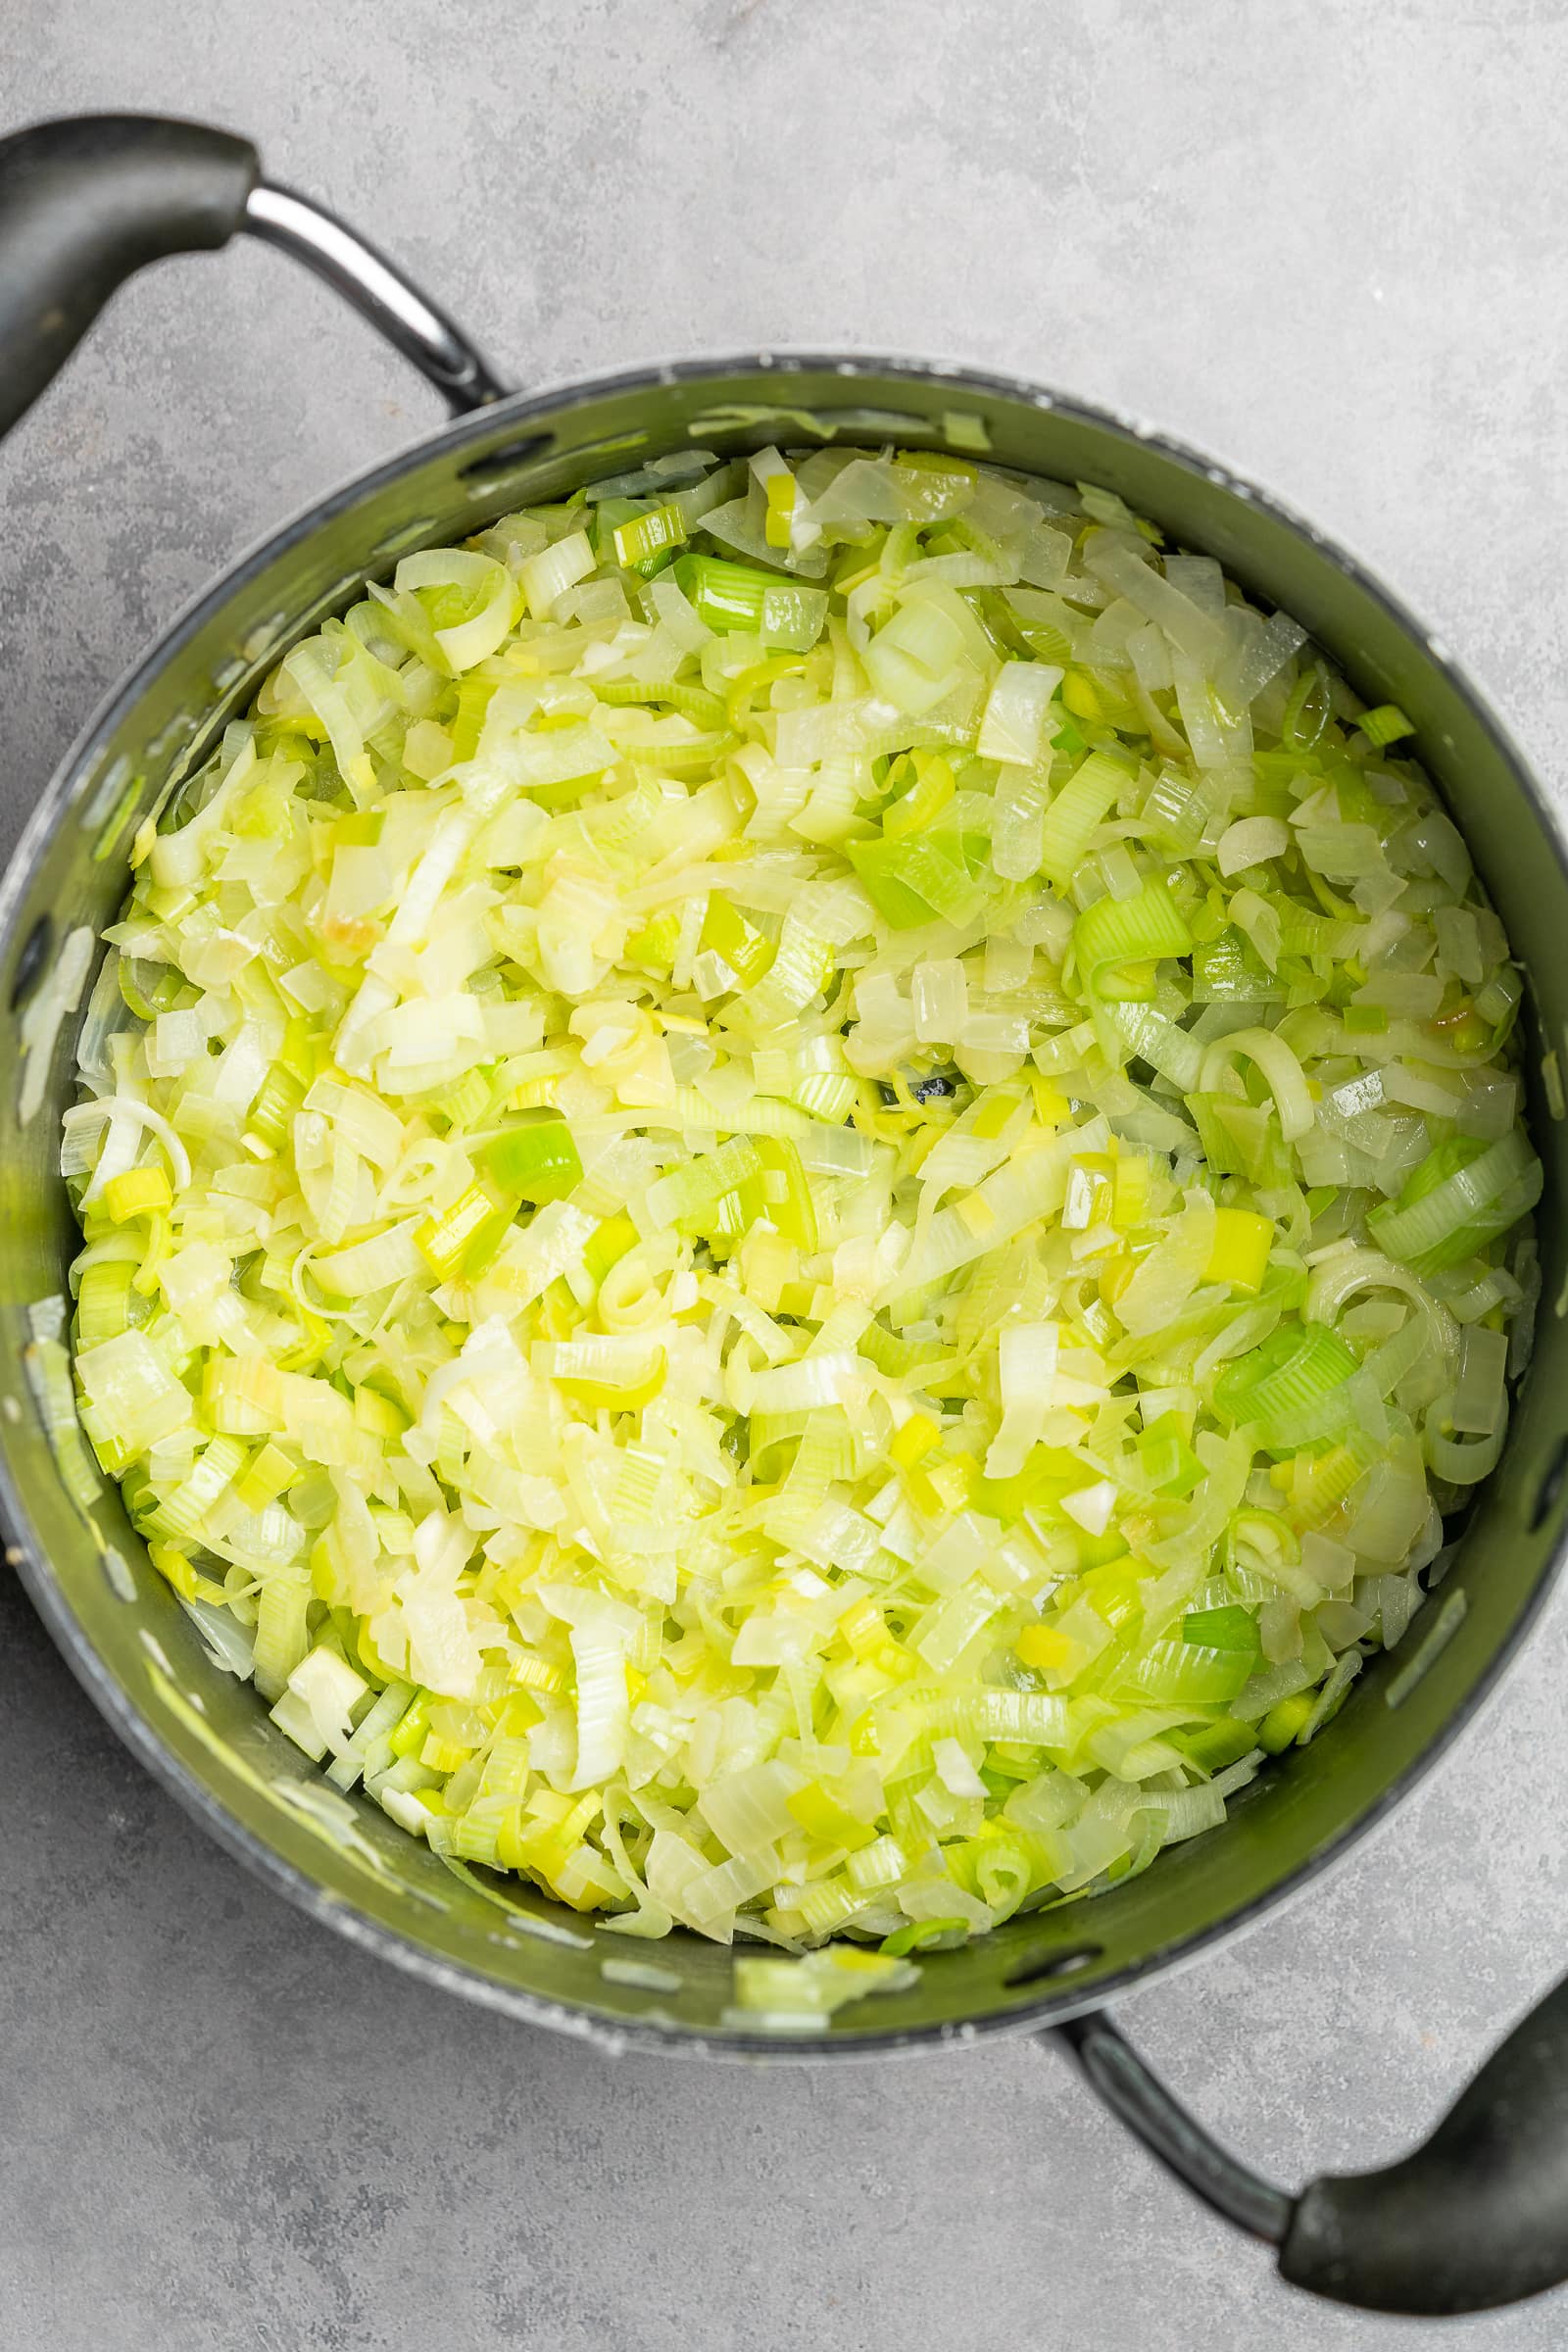 Onions and leeks being cooked in a large soup pot.